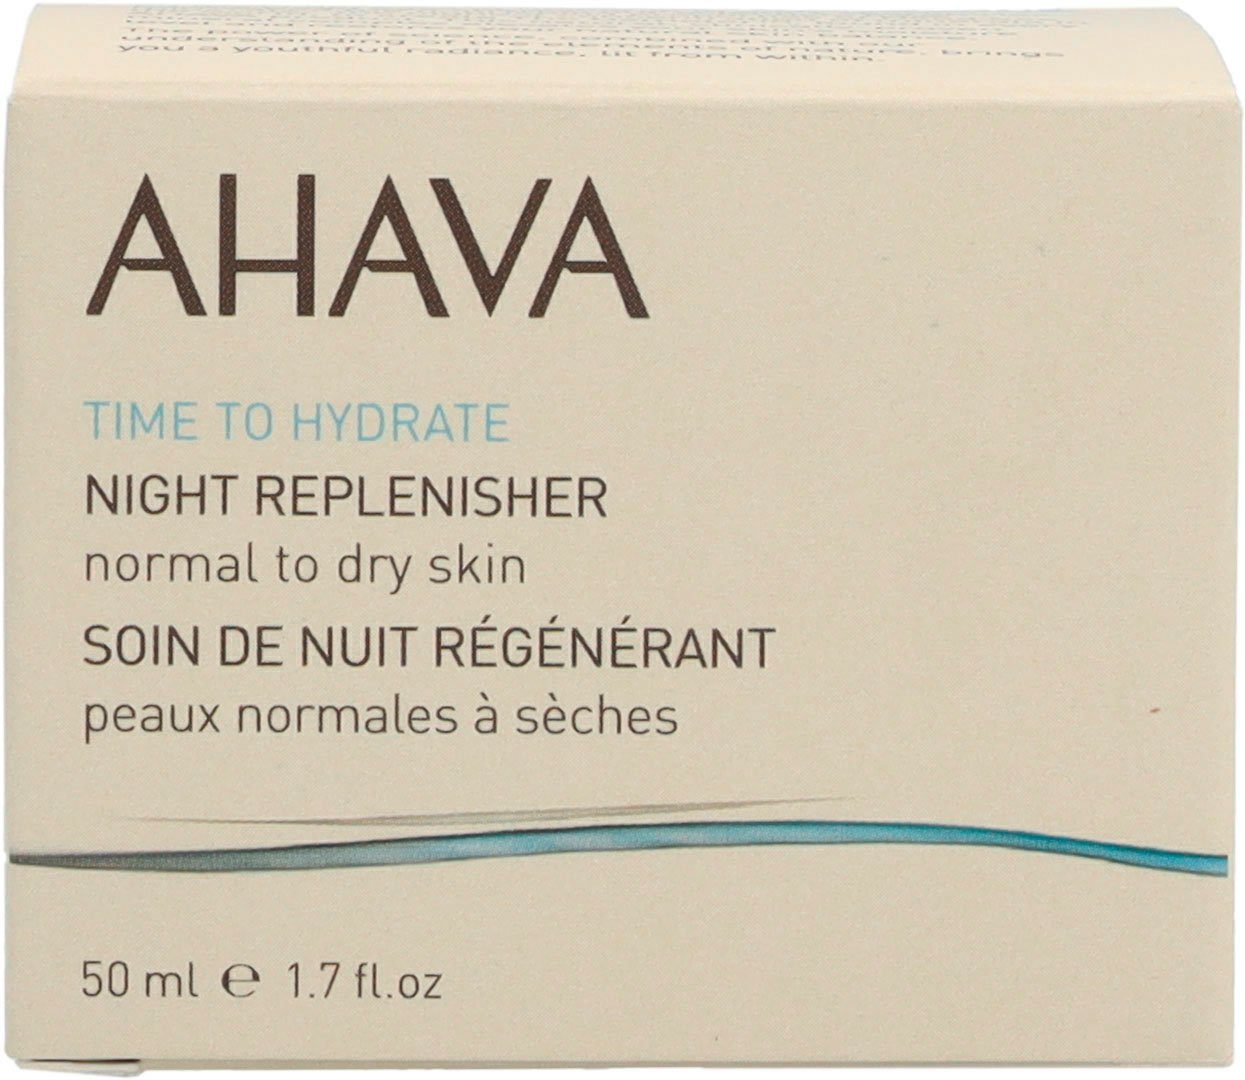 Nachtcreme Replenisher AHAVA To Night Hydrate Normal Time Dry